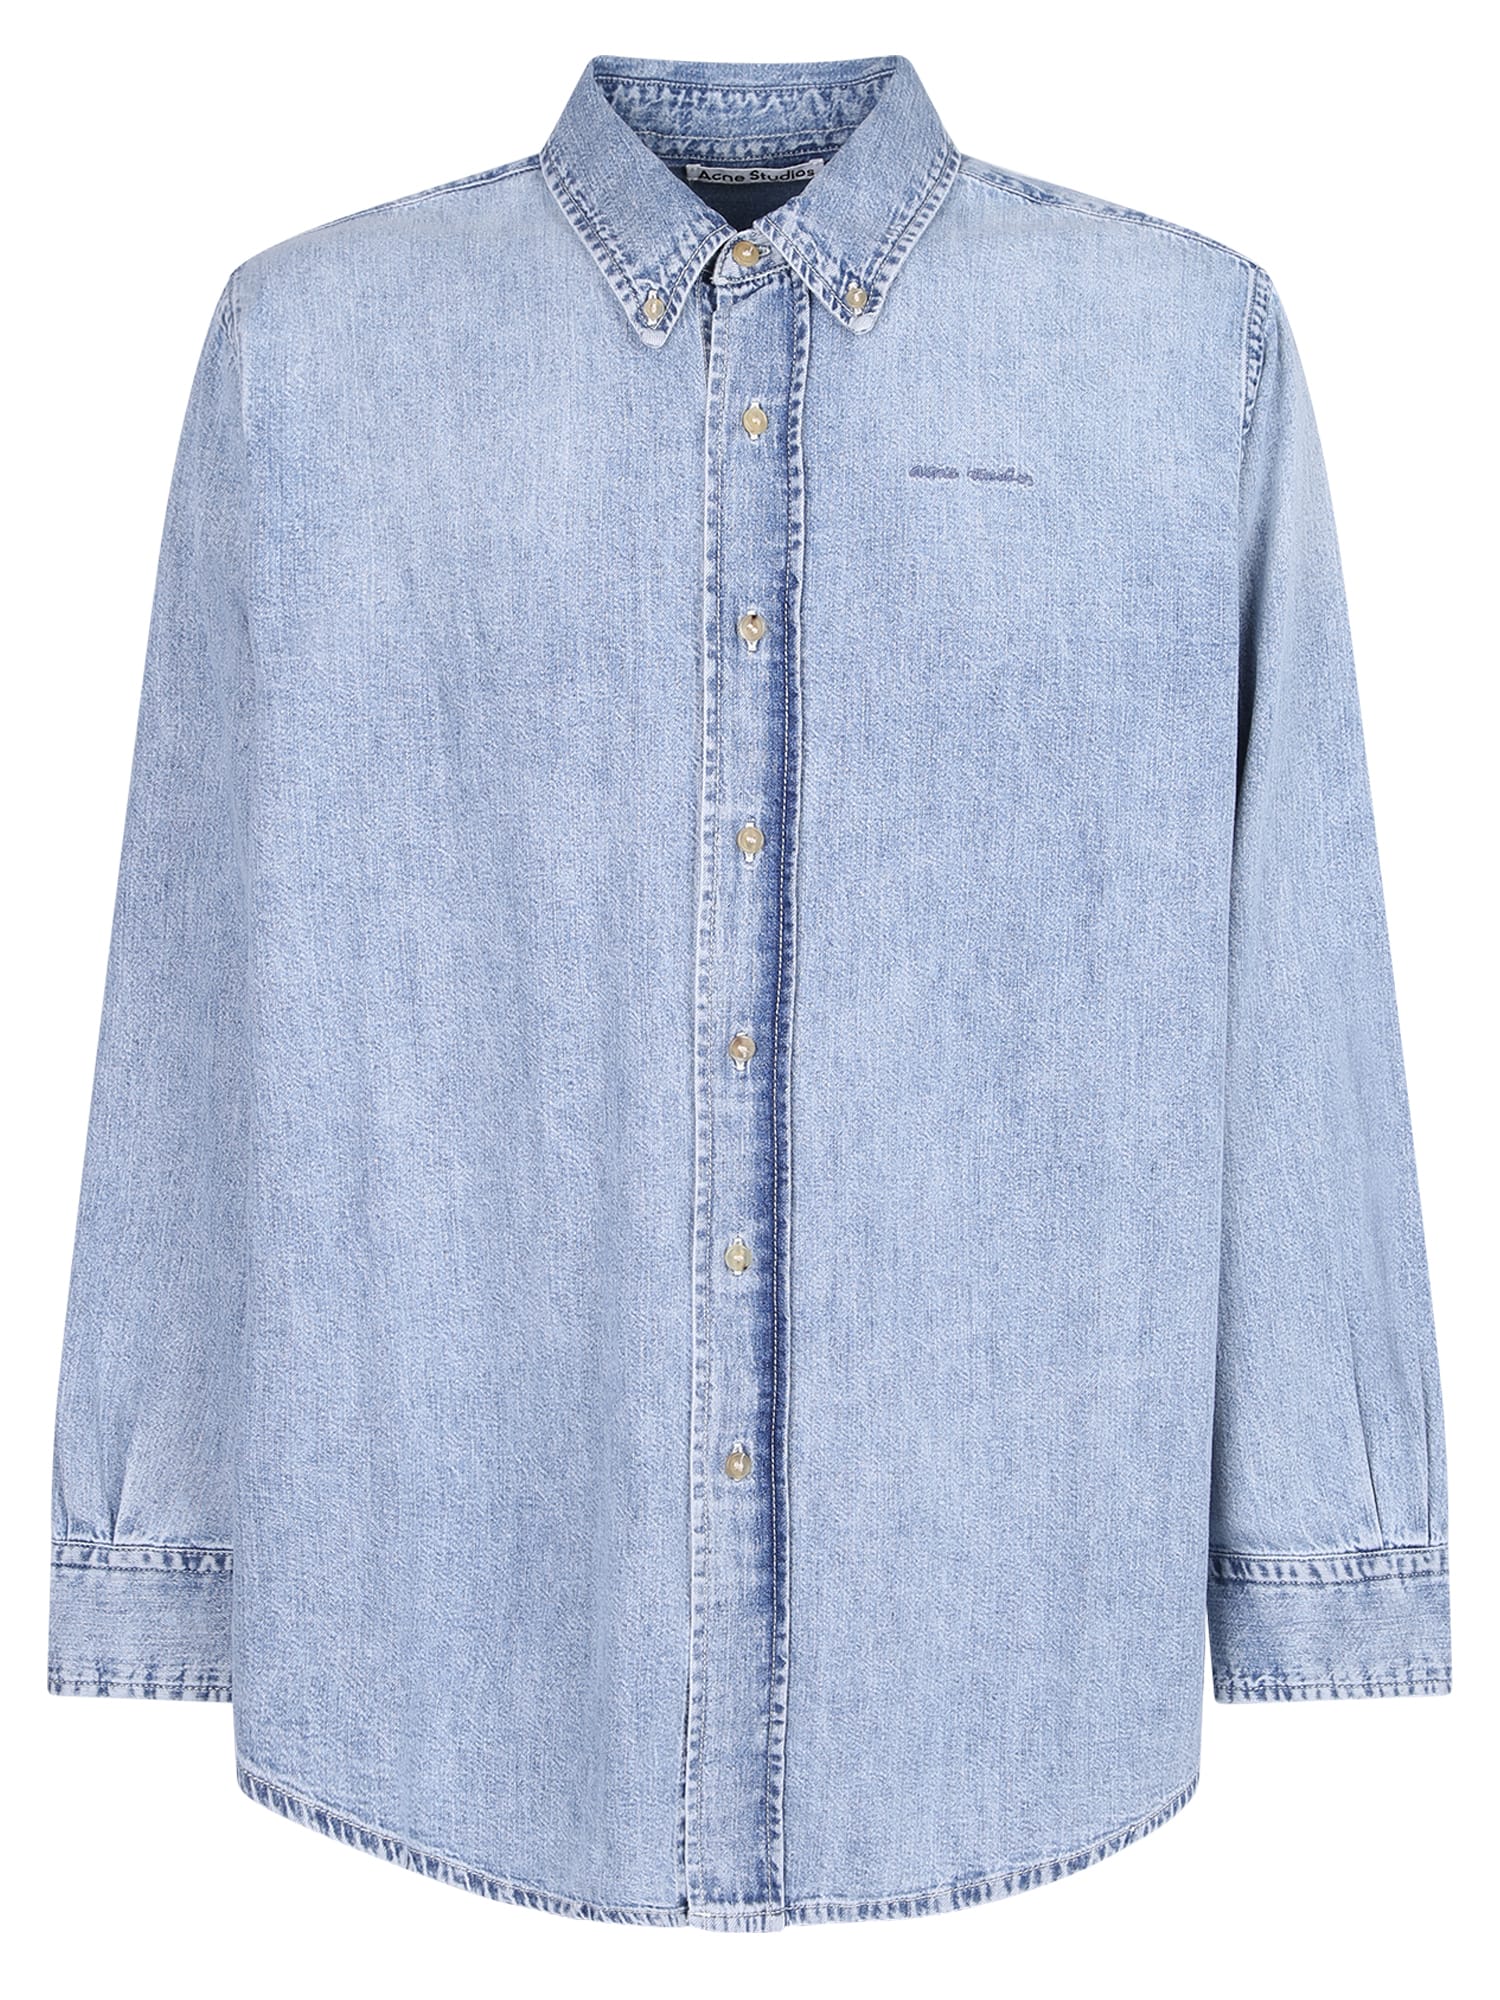 Acne Studios Relaxed Fit Shirt